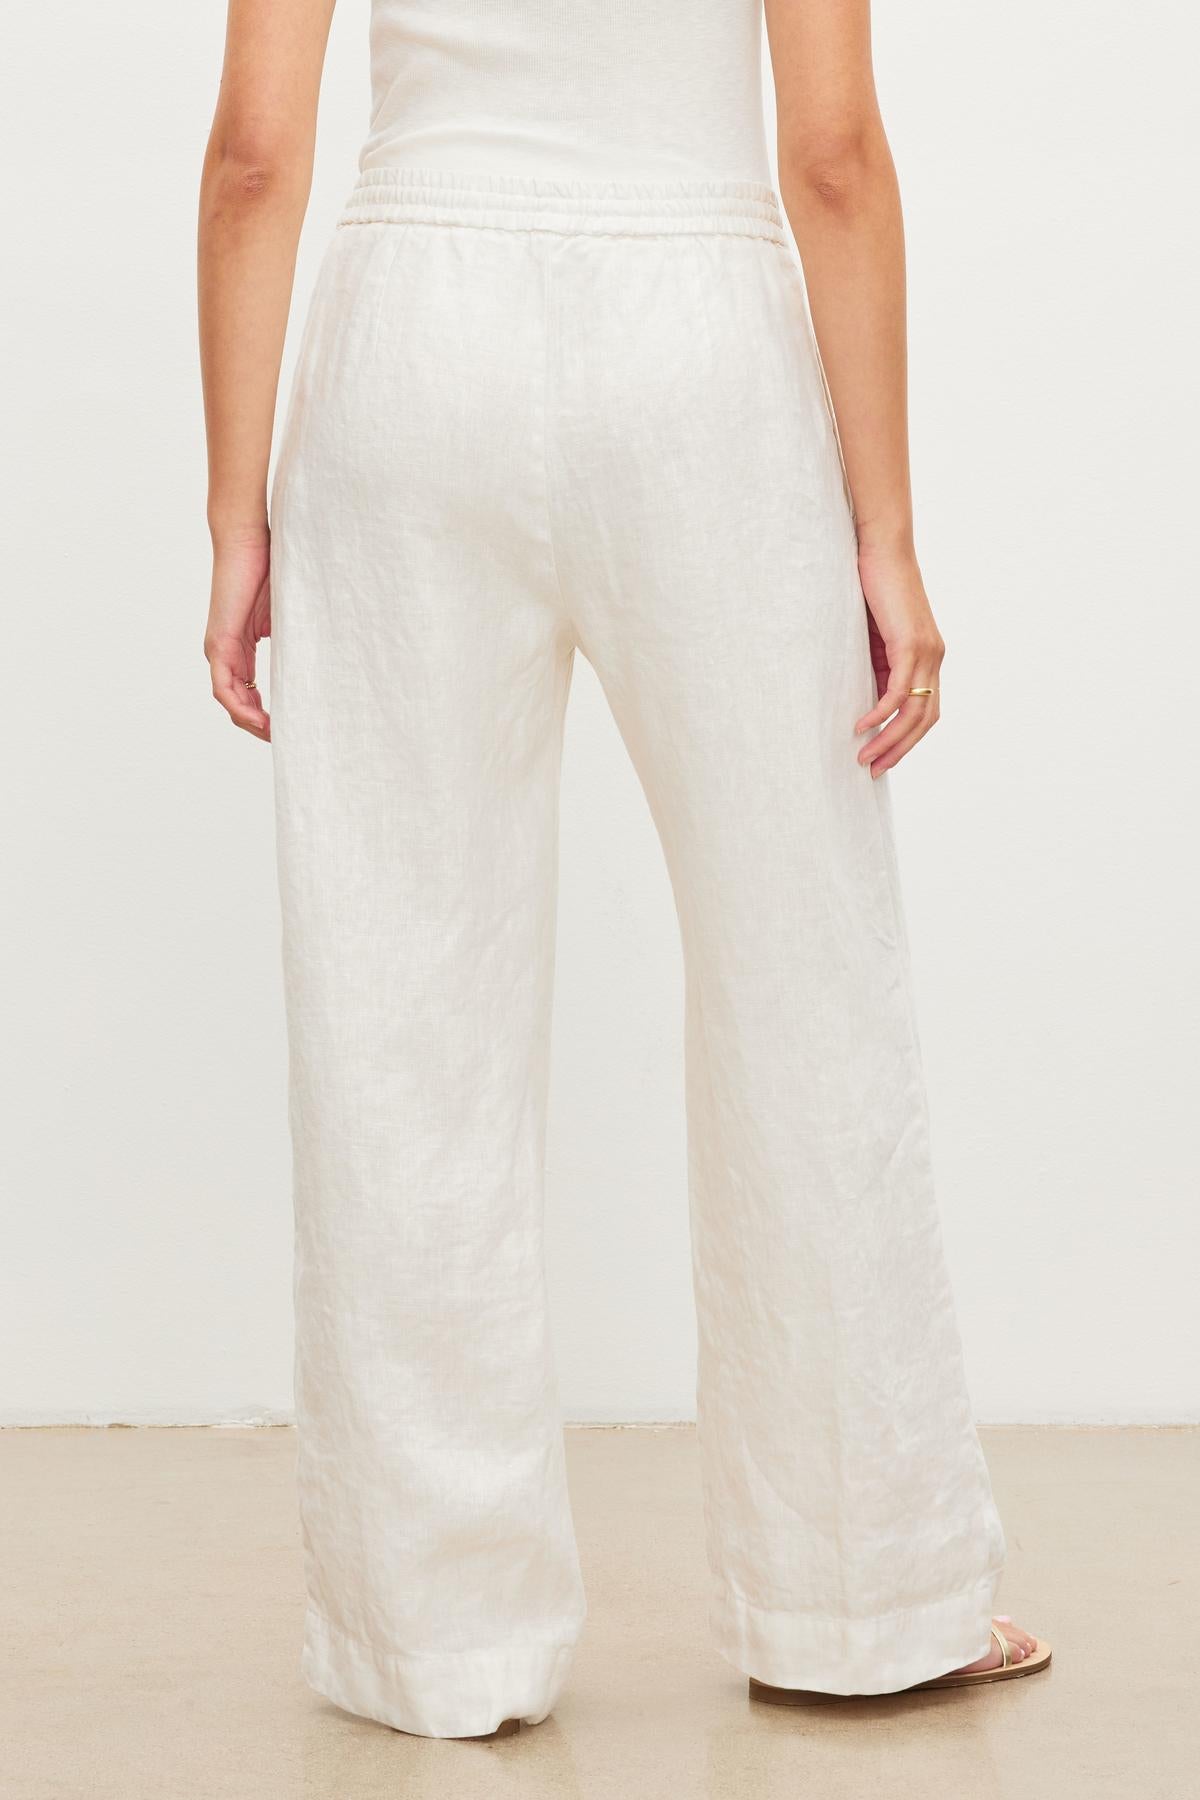 GWYNETH HEAVY LINEN PANT IN BISQUE